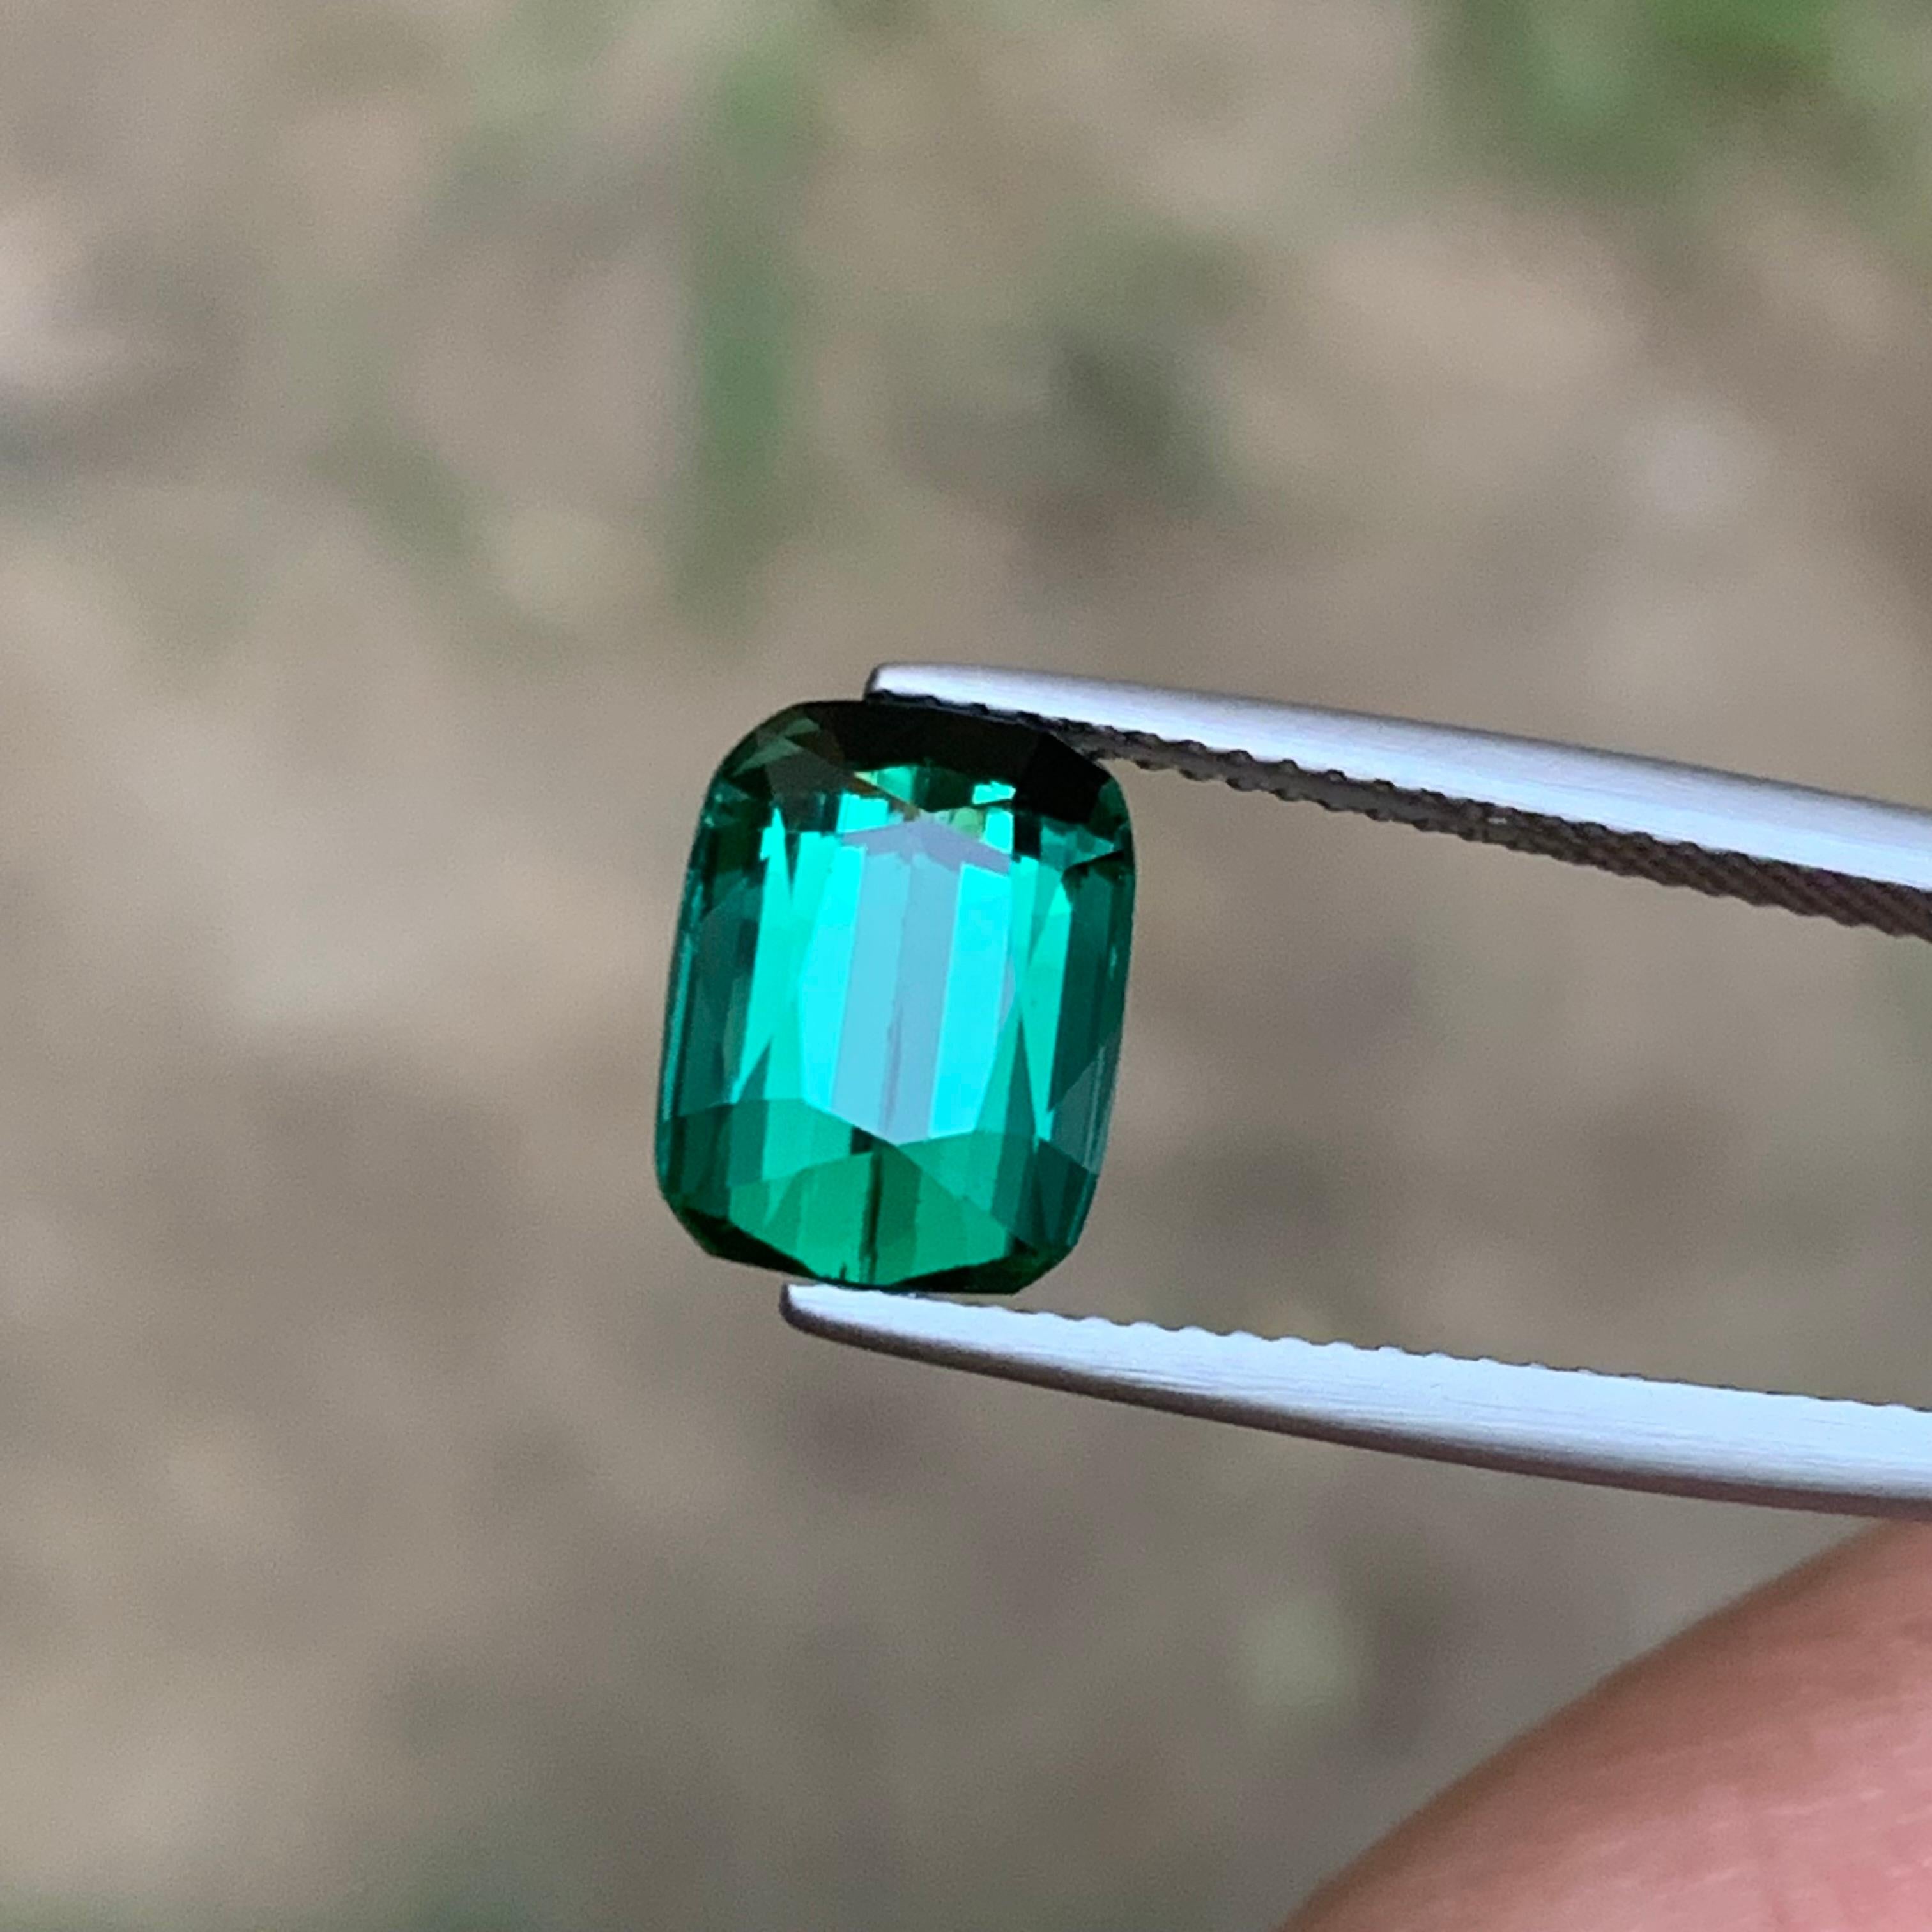 Gemstone Type: Tourmaline
Weight: 4.35 Carats
Dimensions: 10.34 x 7.88 x 6.59
Color: Blue Green
Clarity: Eye Clean
Treatment: Not treated
Origin: Afghanistan 
Certificate: On demand 

Elevate your jewelry creations with our exquisite blue-green